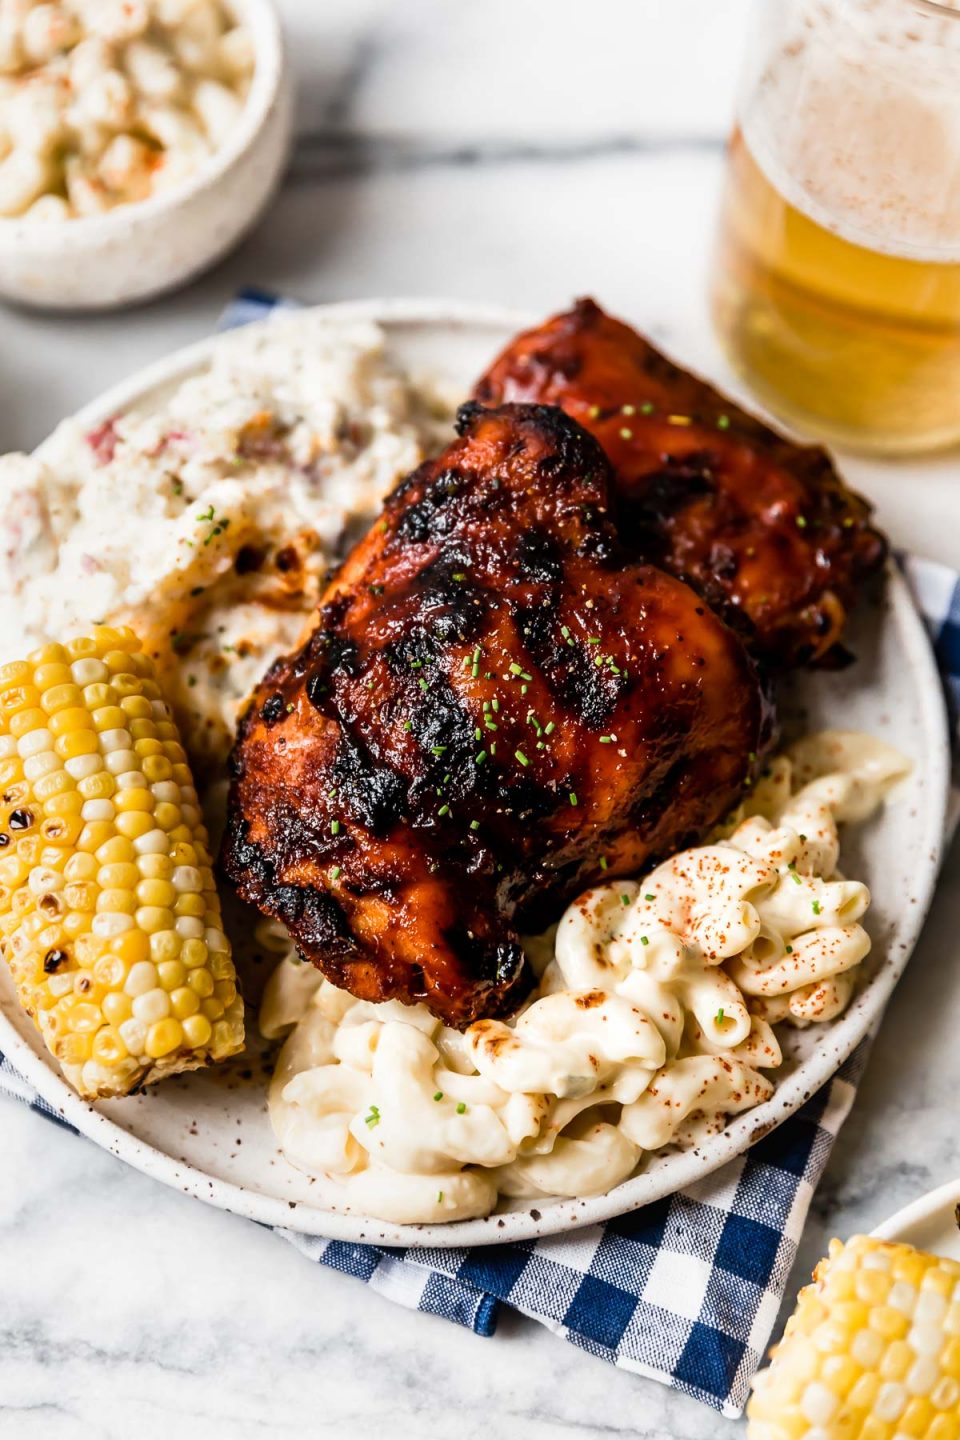 Grilled BBQ chicken on a plate with macaroni salad, potato salad, & corn on the cob. The plate is surrounded by more side dishes, extra BBQ sauce & a glass of beer.